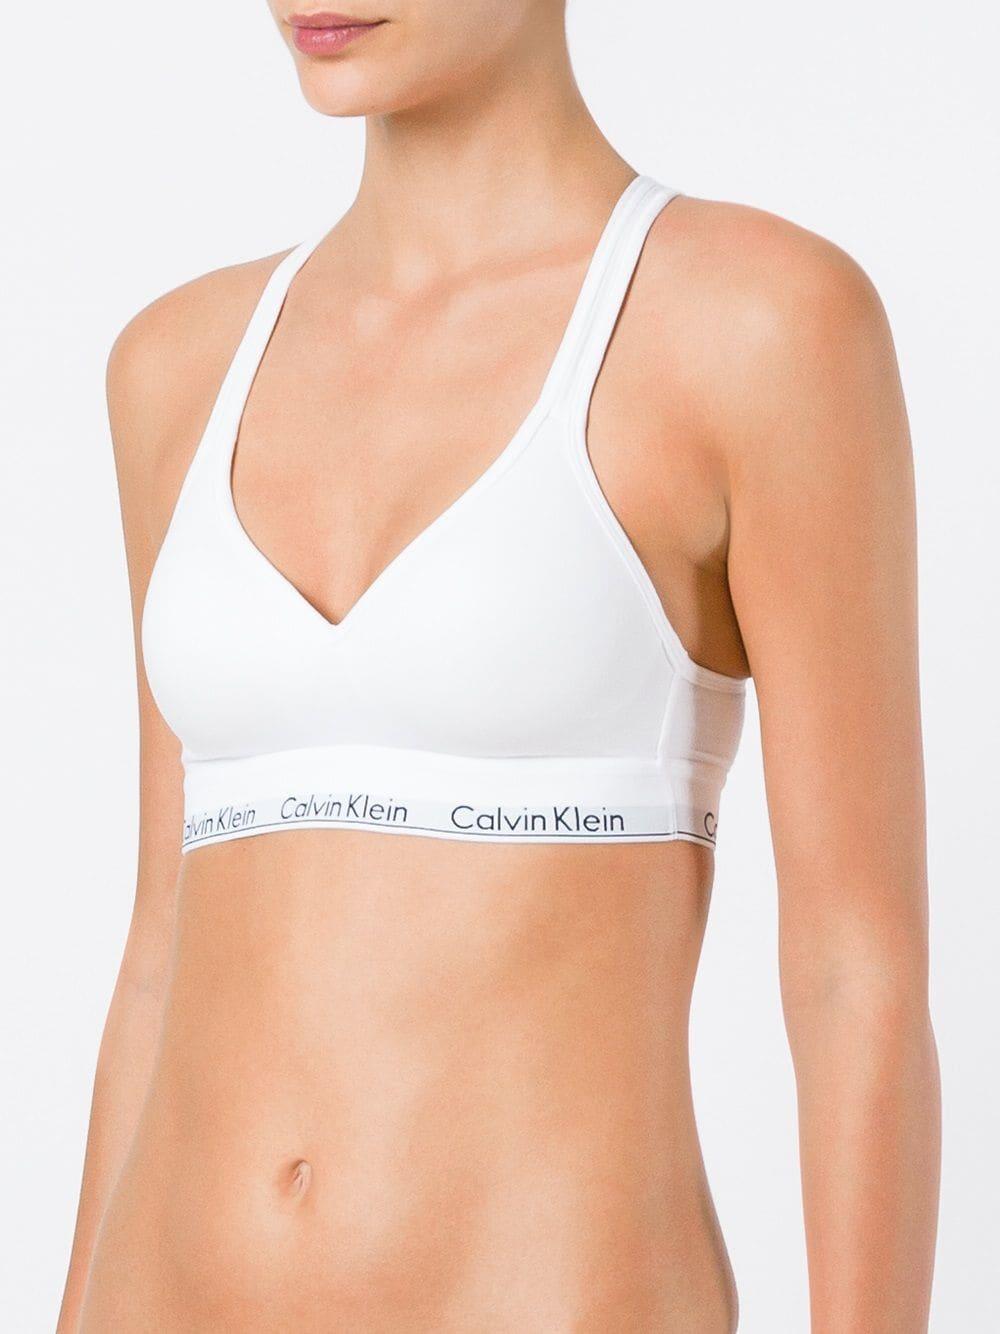 Calvin Klein Sports Bra with Criss Cross Back & Built in Push-Up